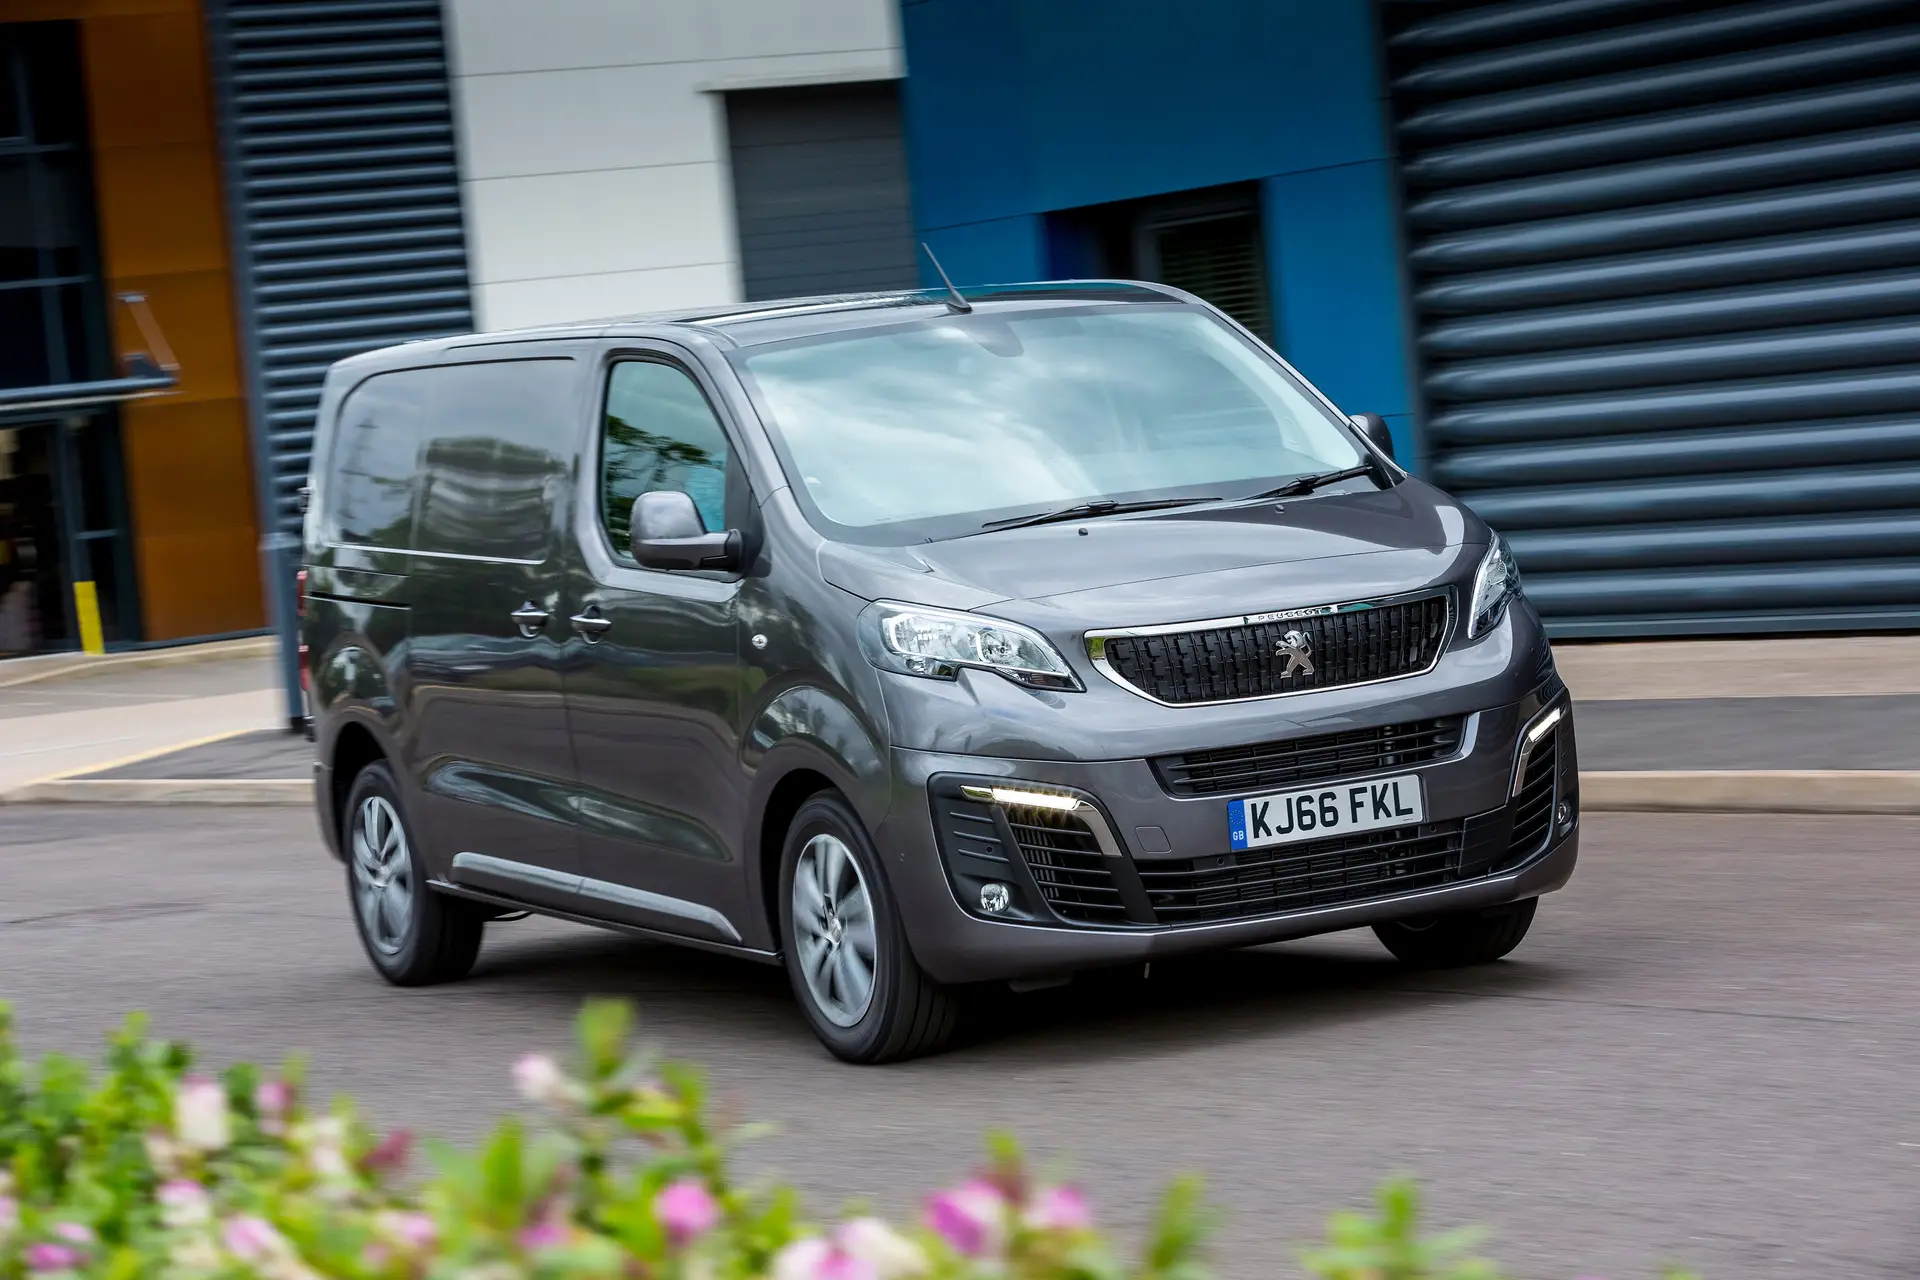 Peugeot Expert Dimensions 2021 - Length, Width, Height, Turning